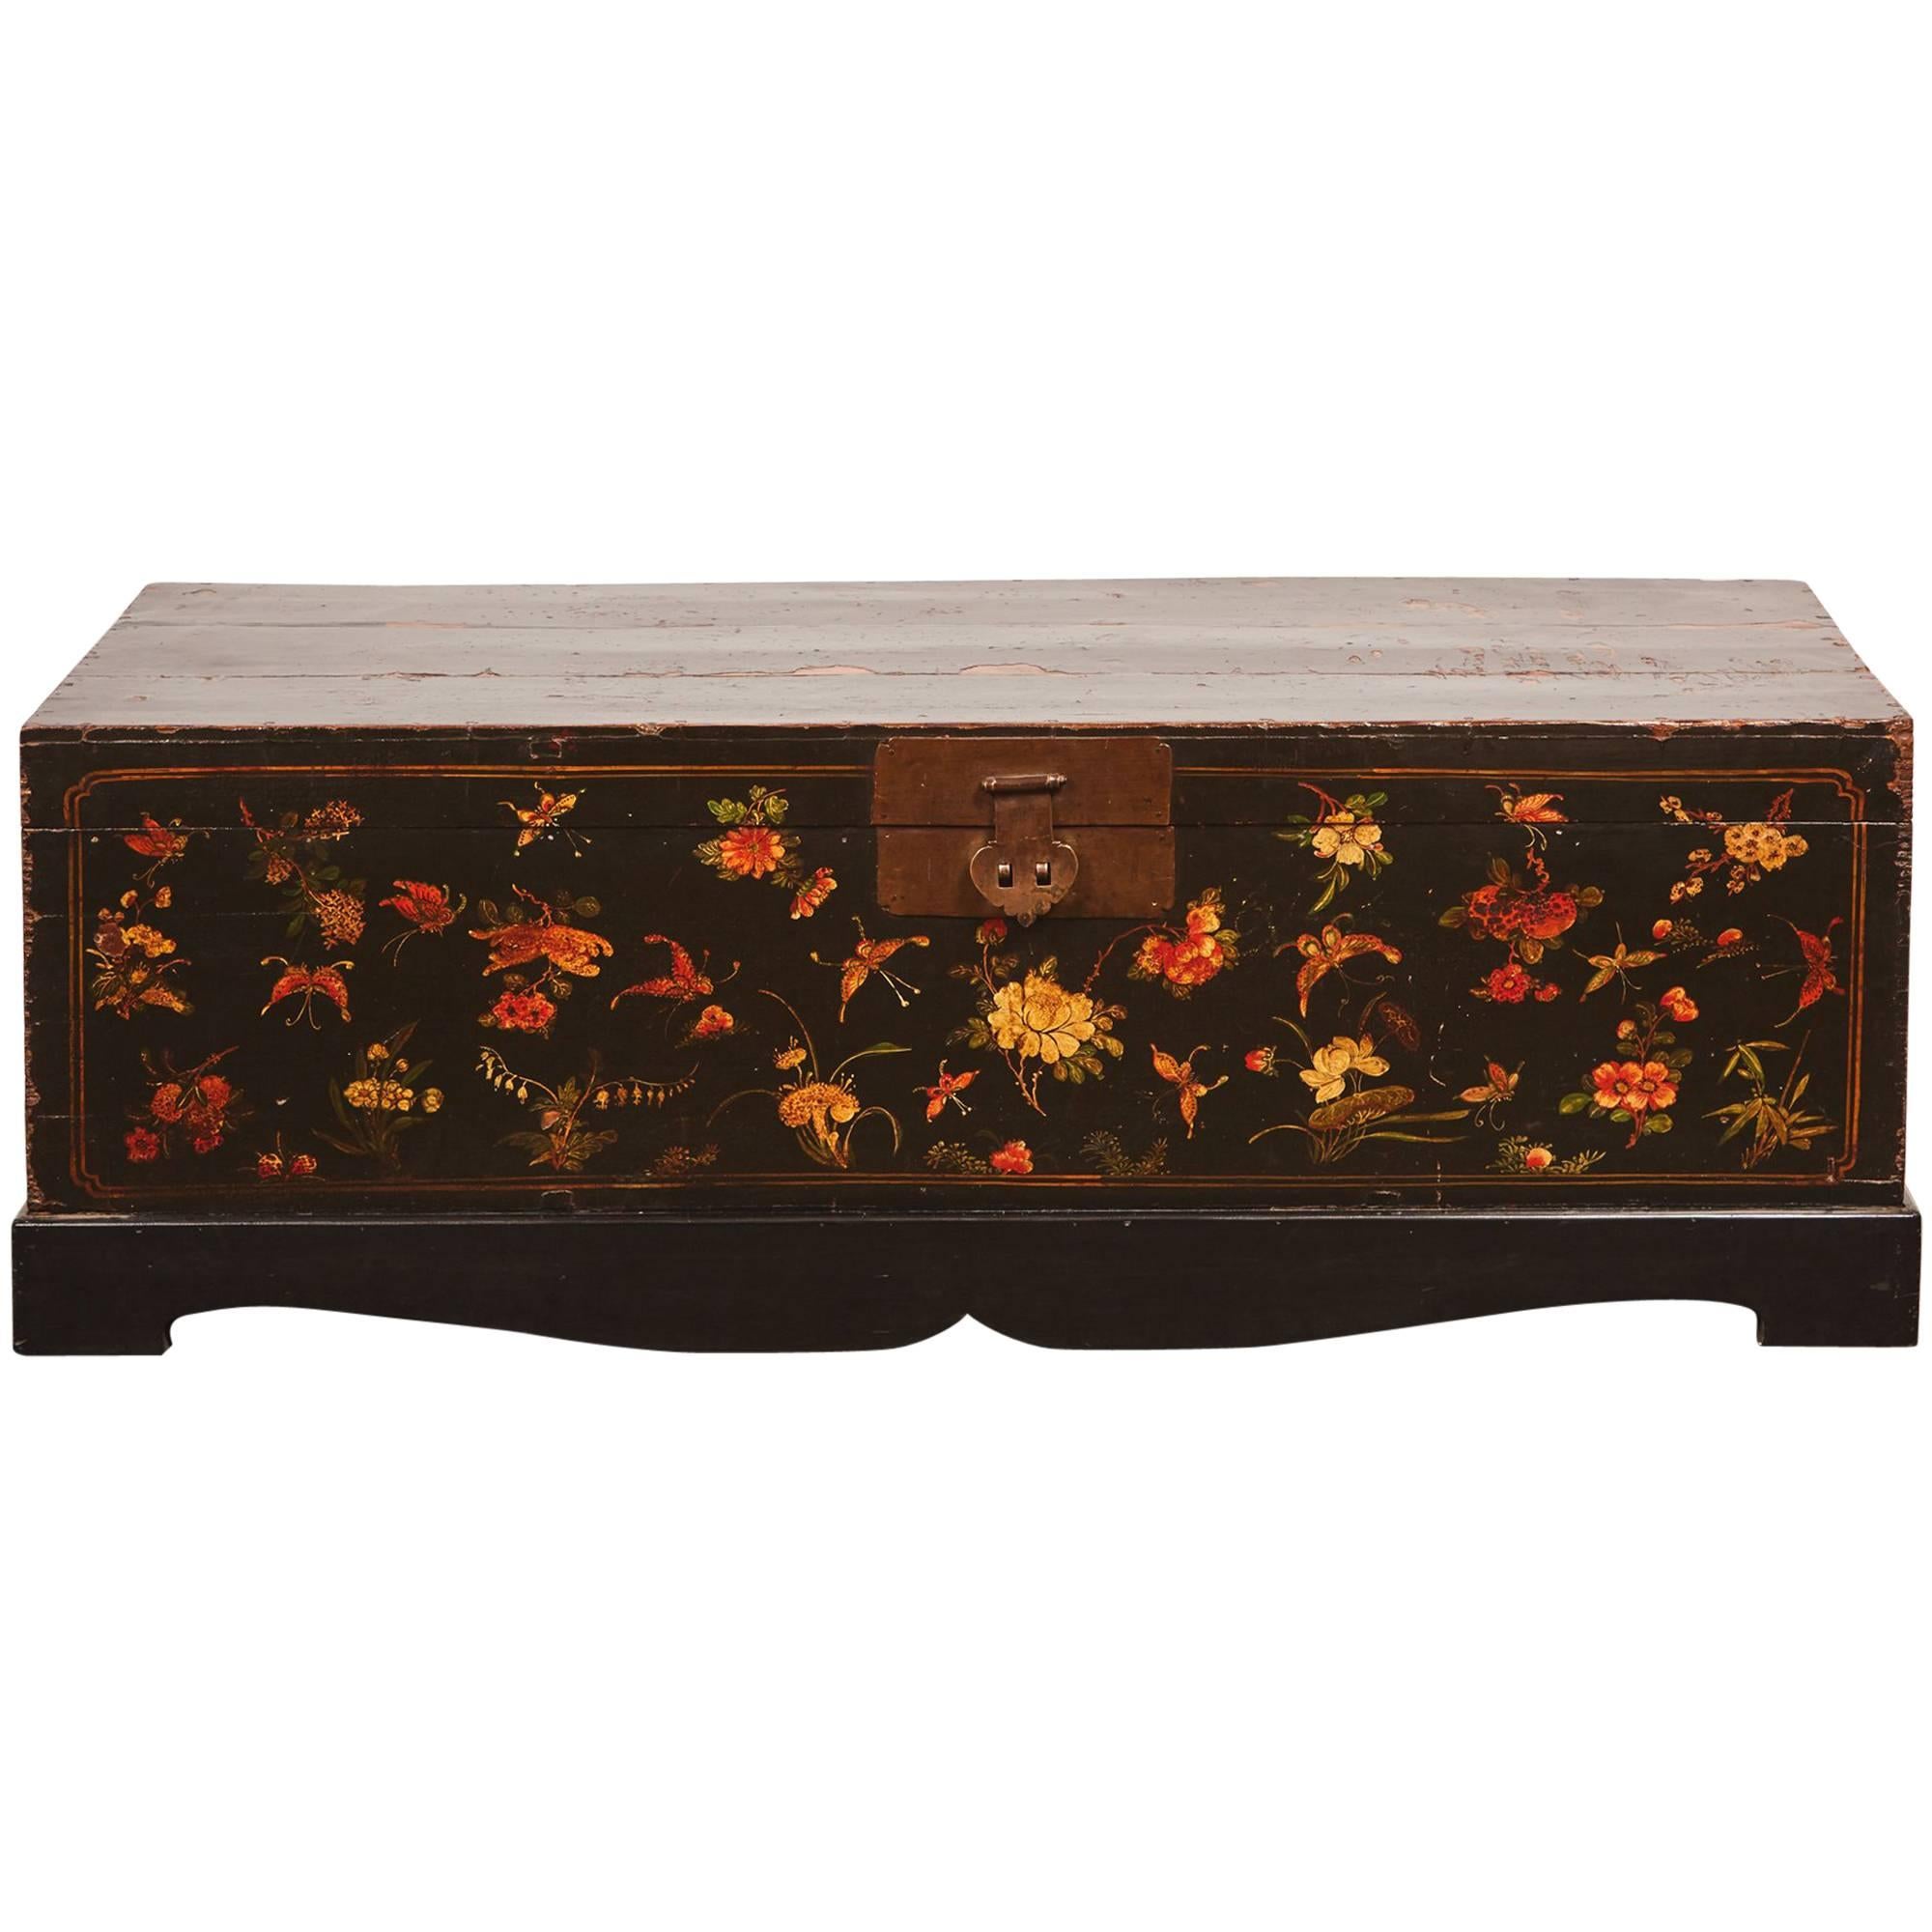 19th Century Qing Style Lacquer Painted Trunk with Butterfly Motifs